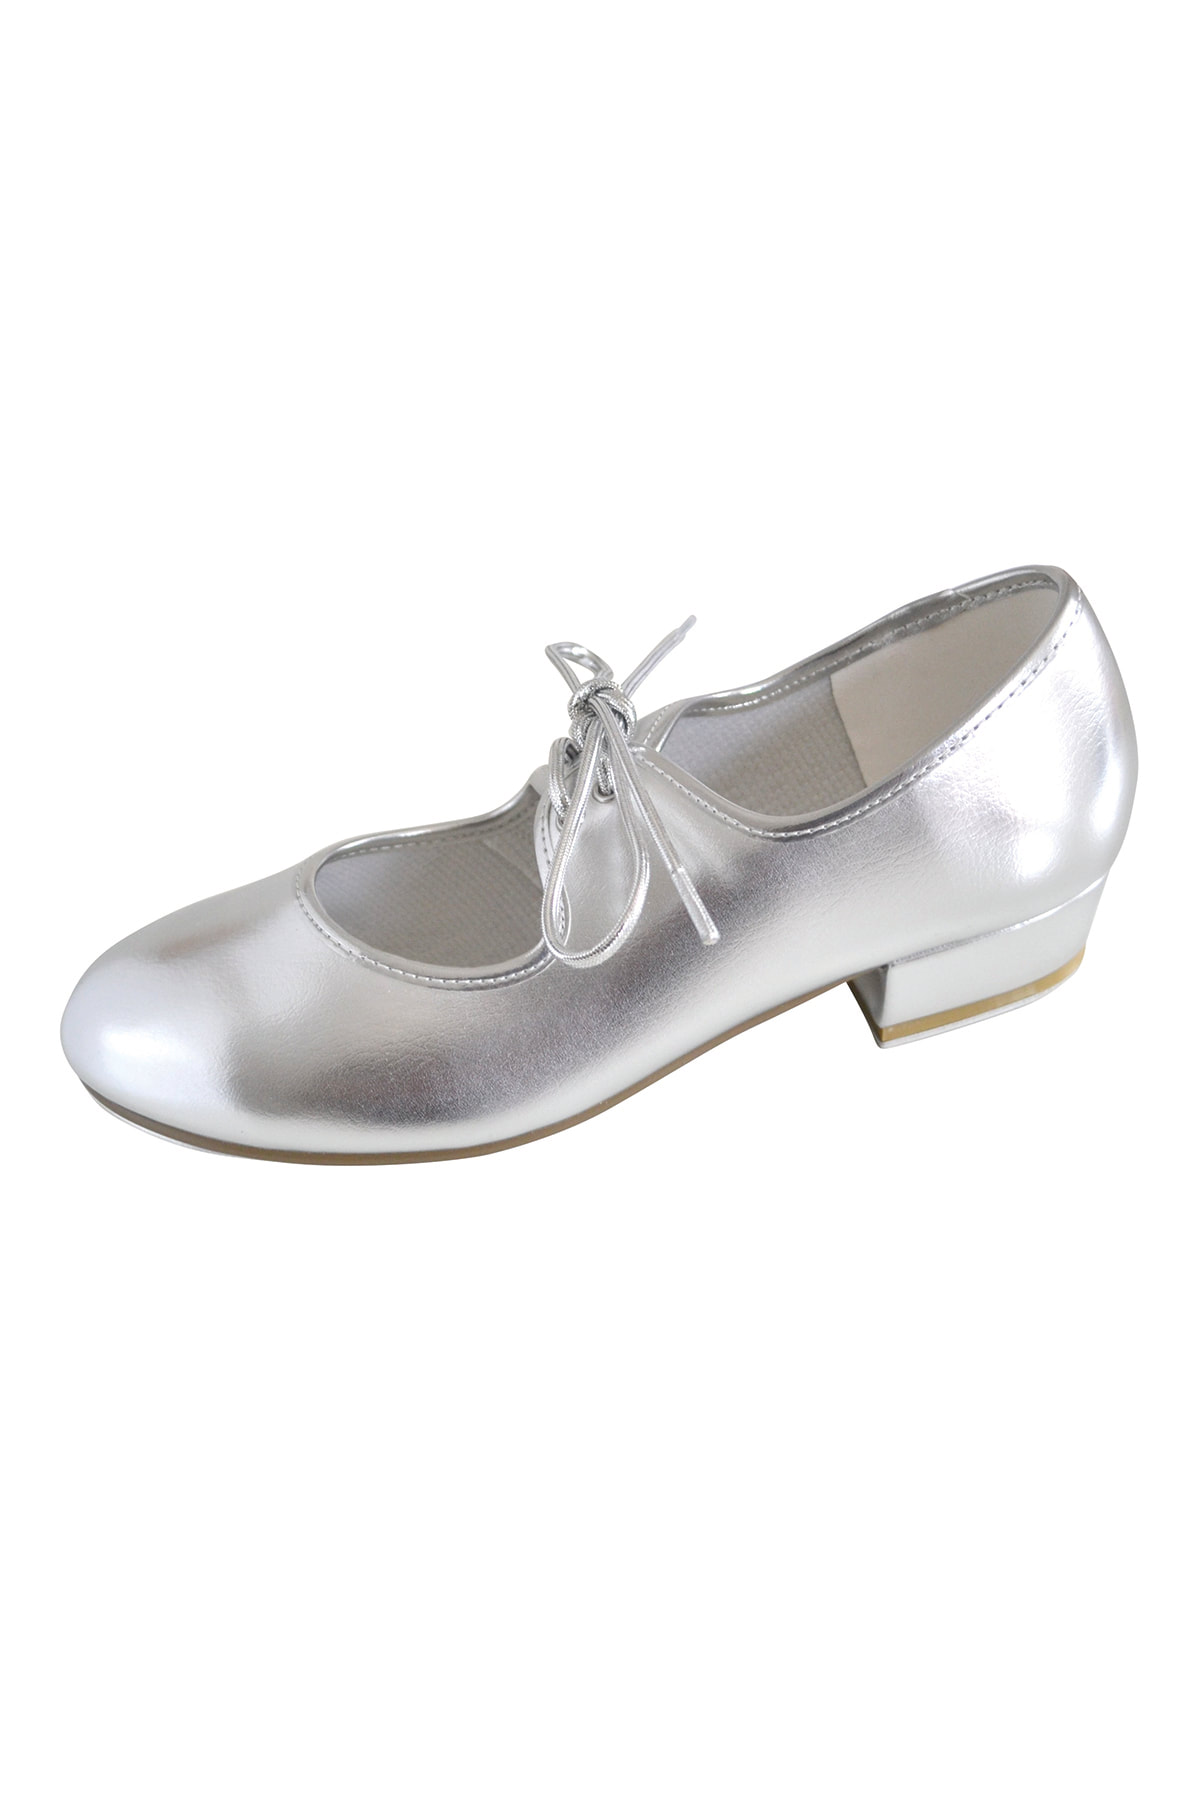 roch valley silver tap shoes, silver 